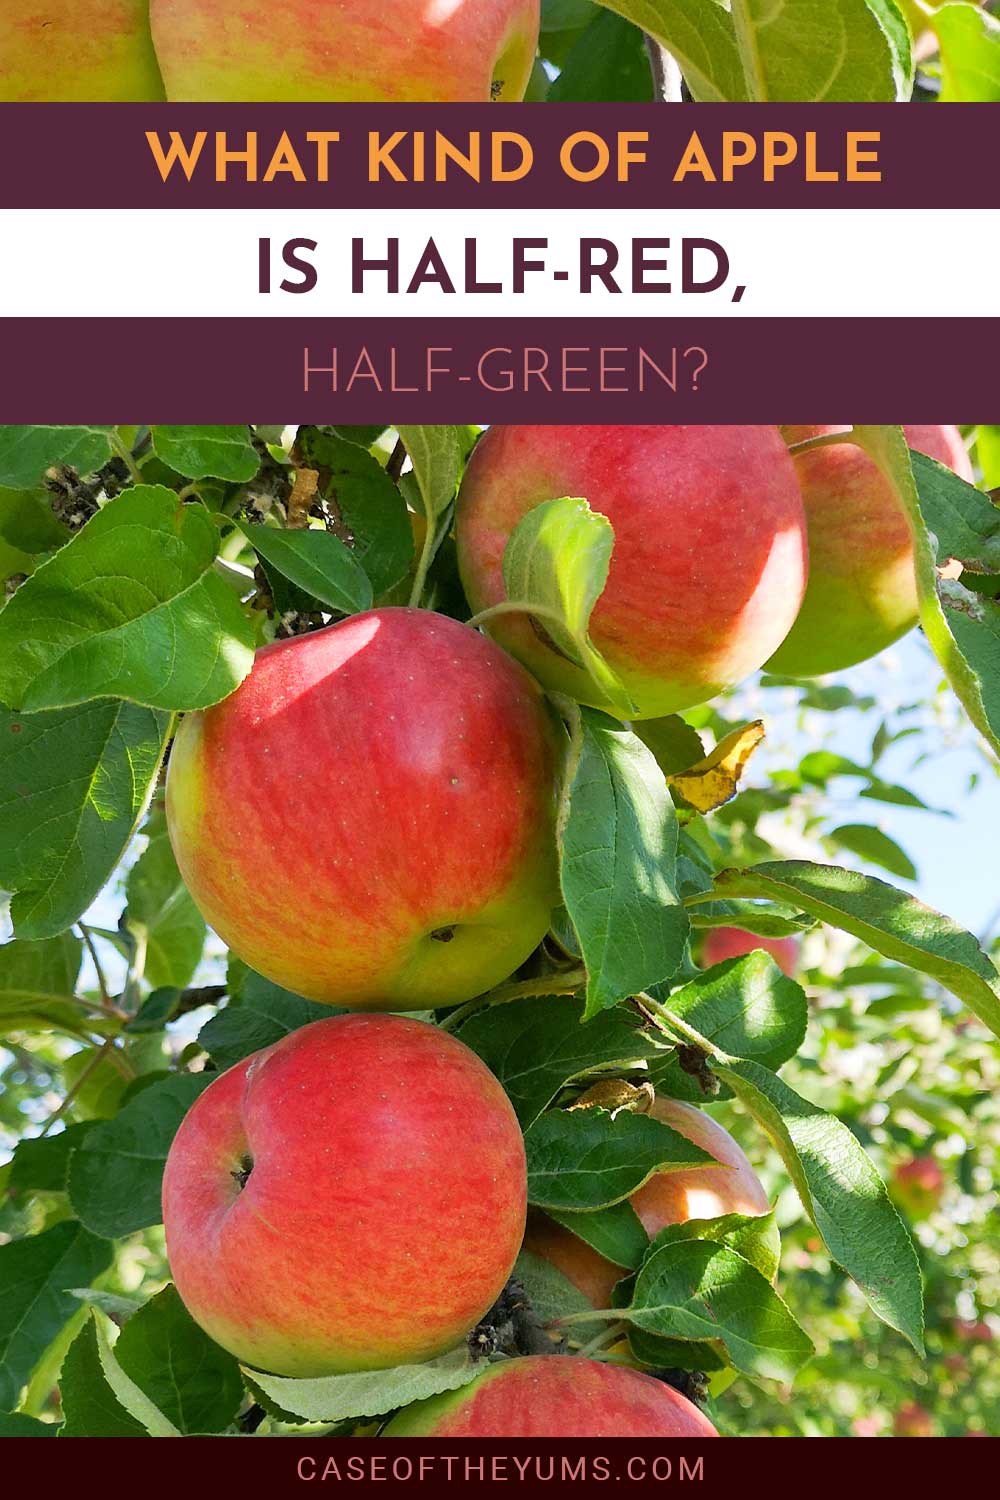 Some apples on a tree - What Kind Of Apple Is Half-Red, Half-Green?